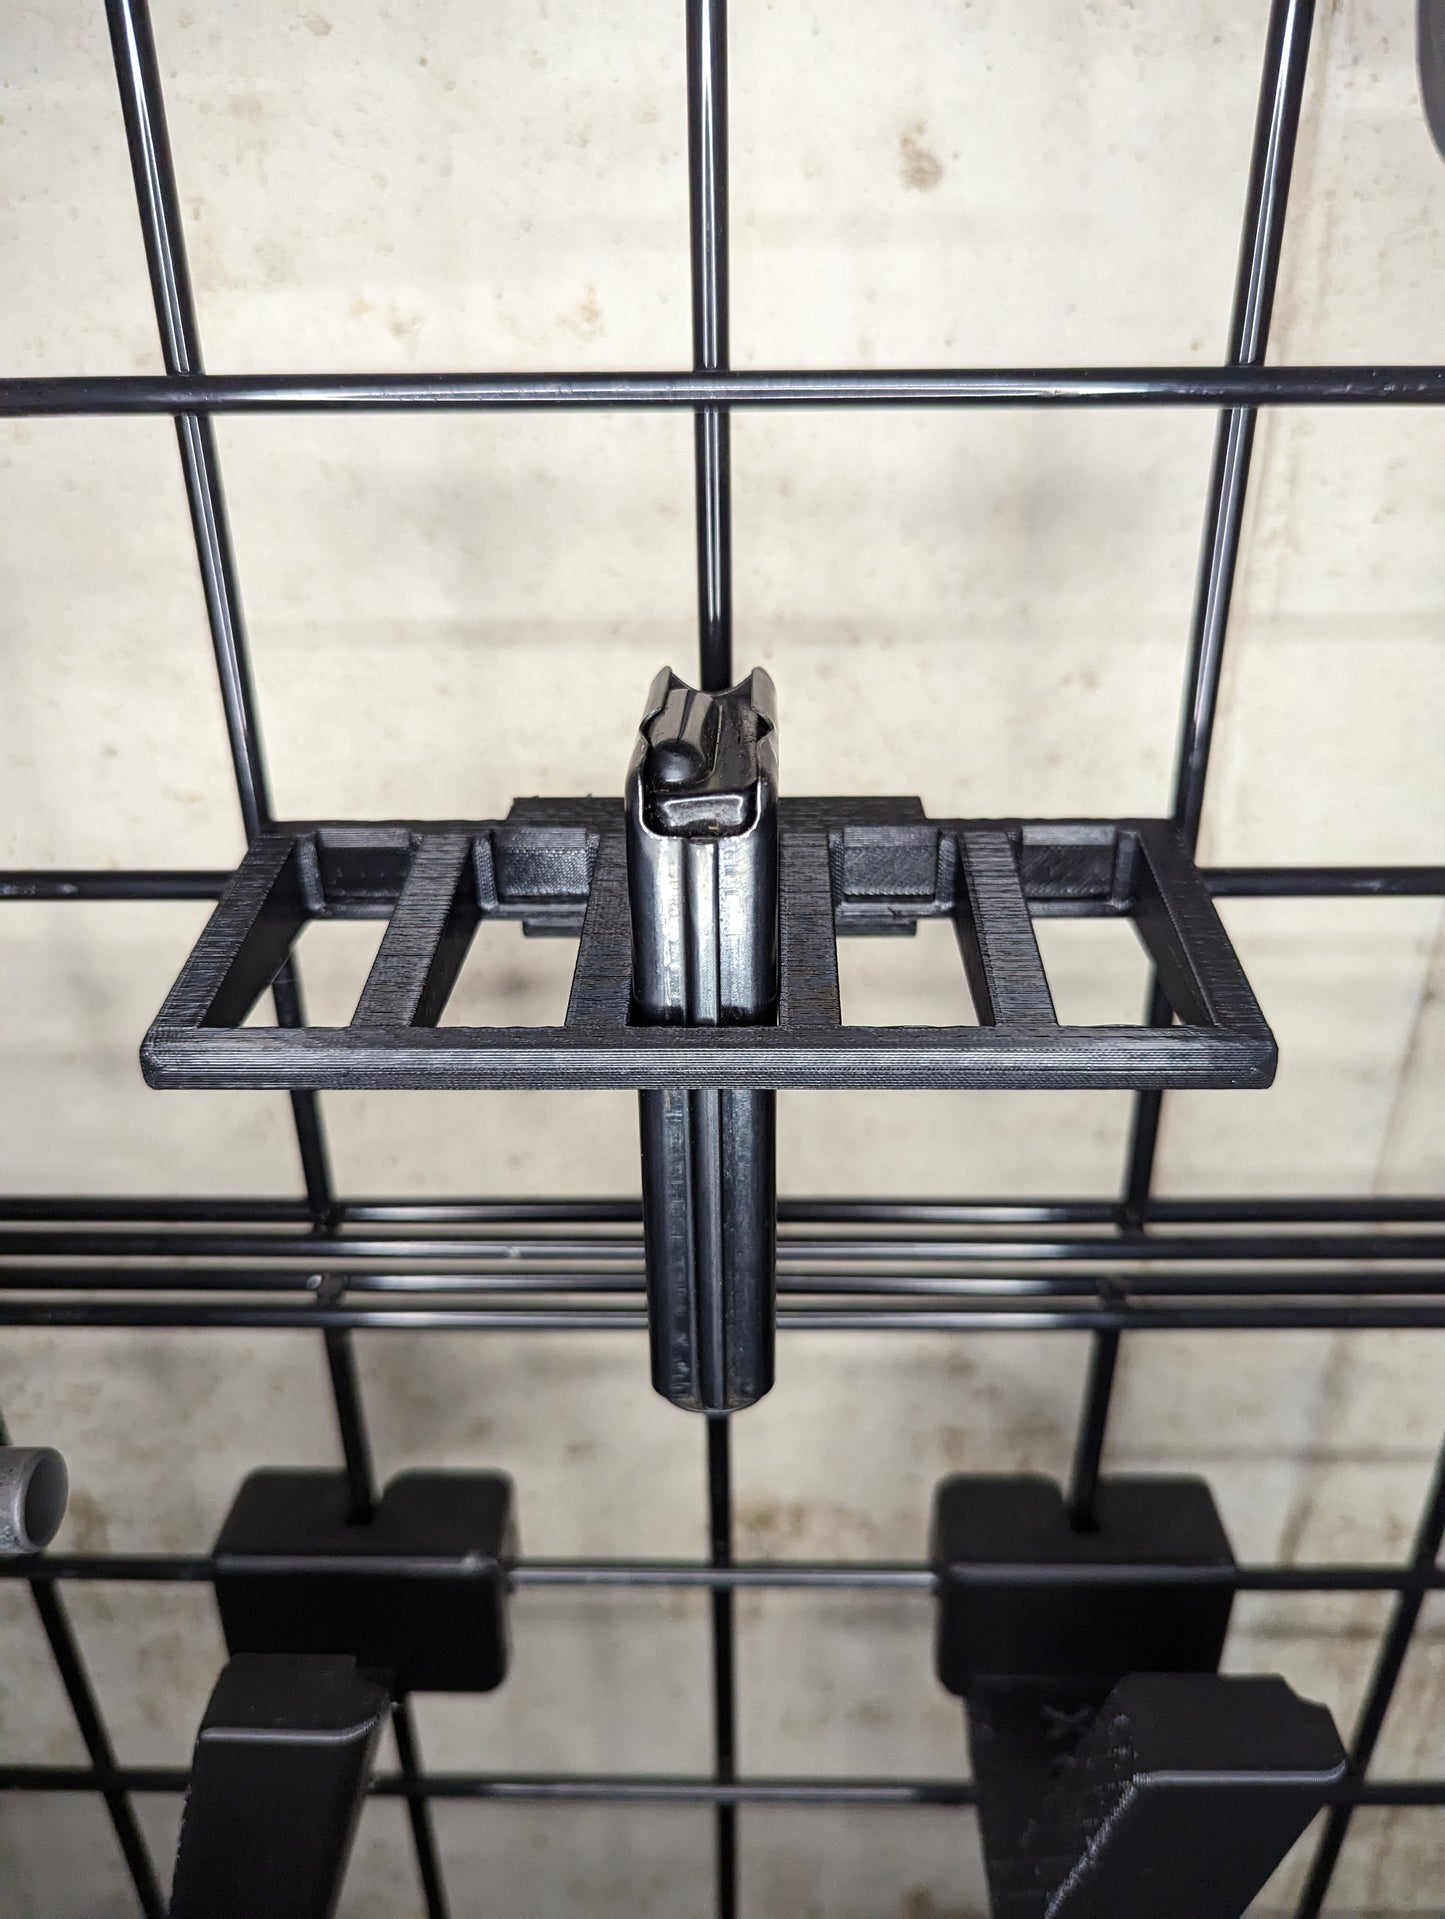 Mount for M1 Carbine Mags - Gridwall | Magazine Holder Storage Rack